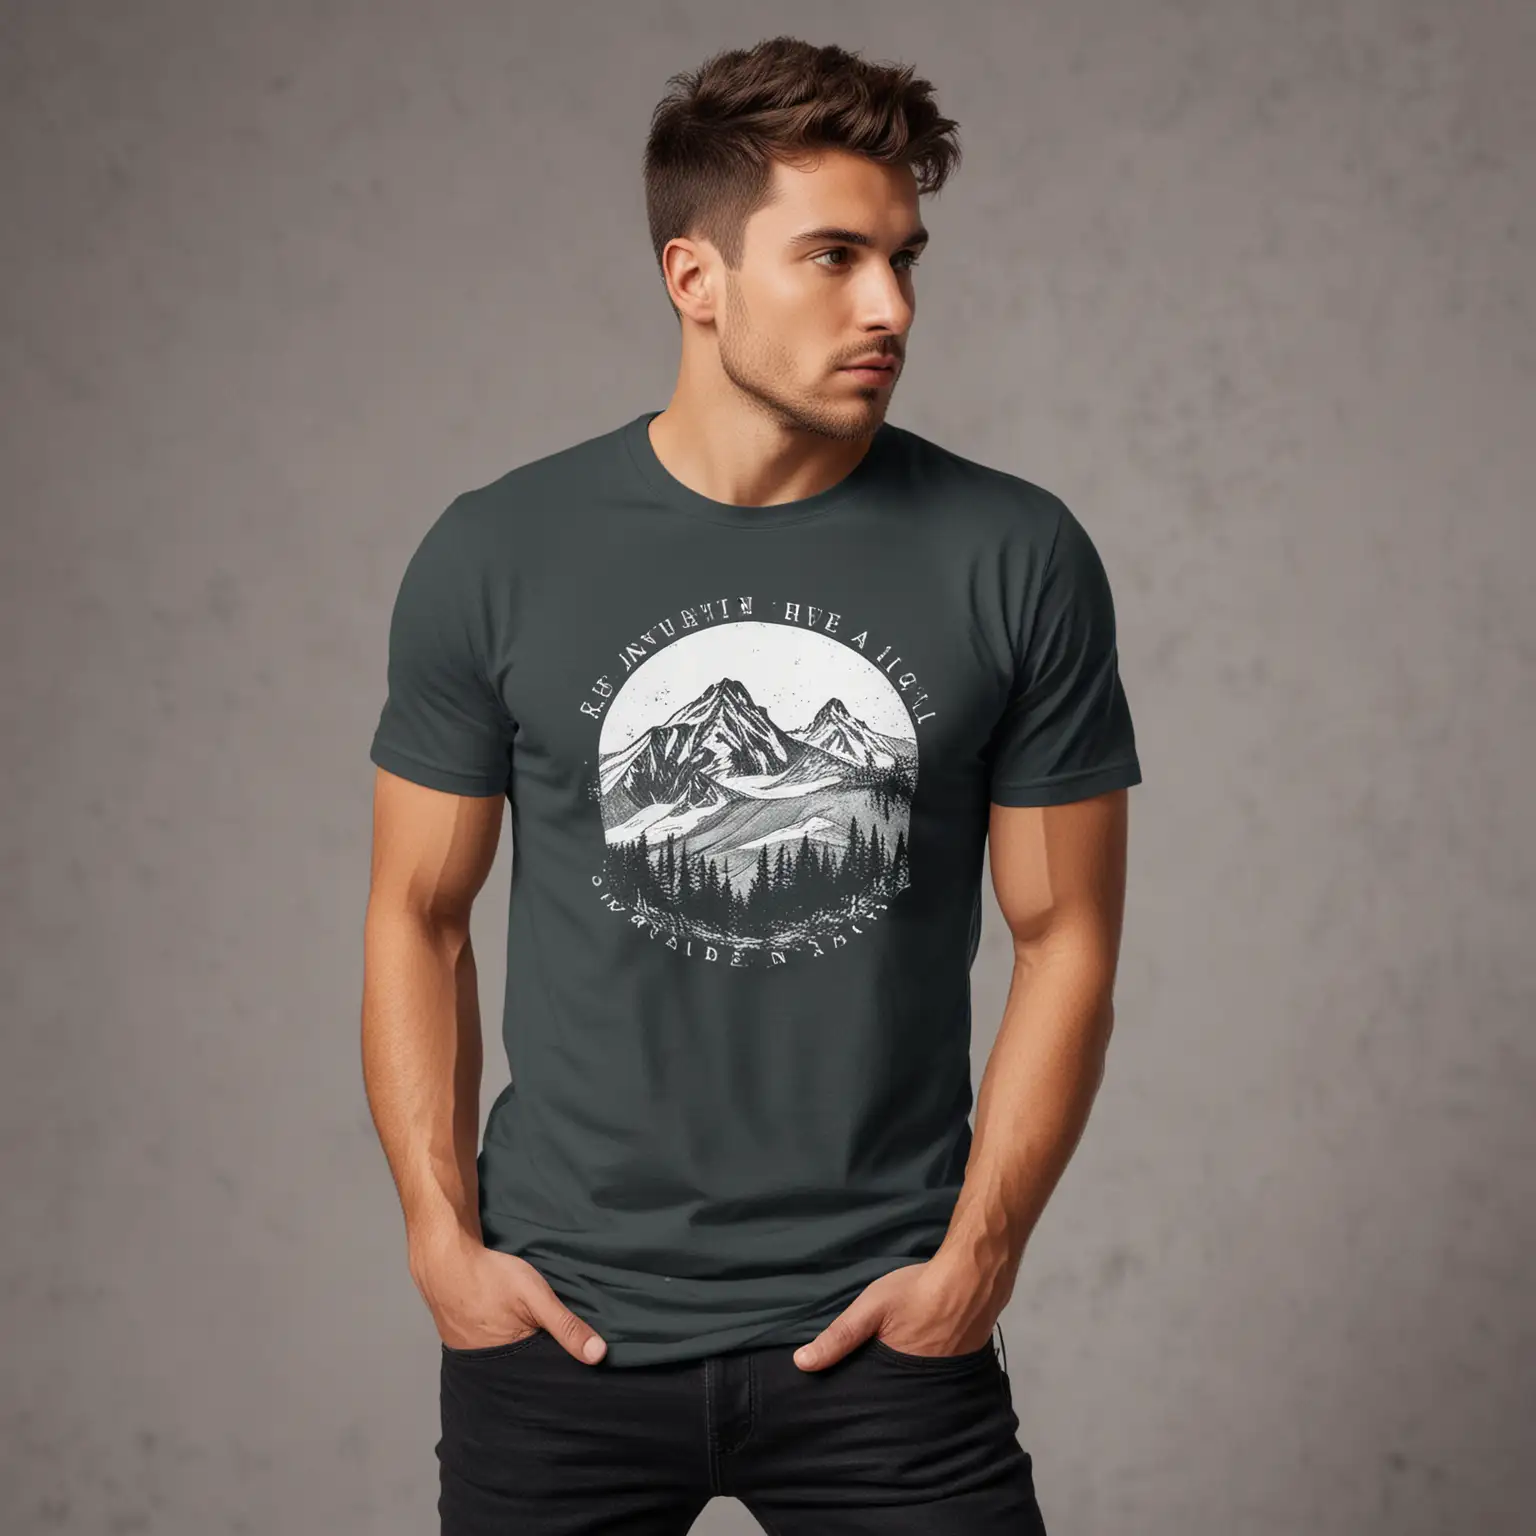 clothing website images with print on demand t shirt
